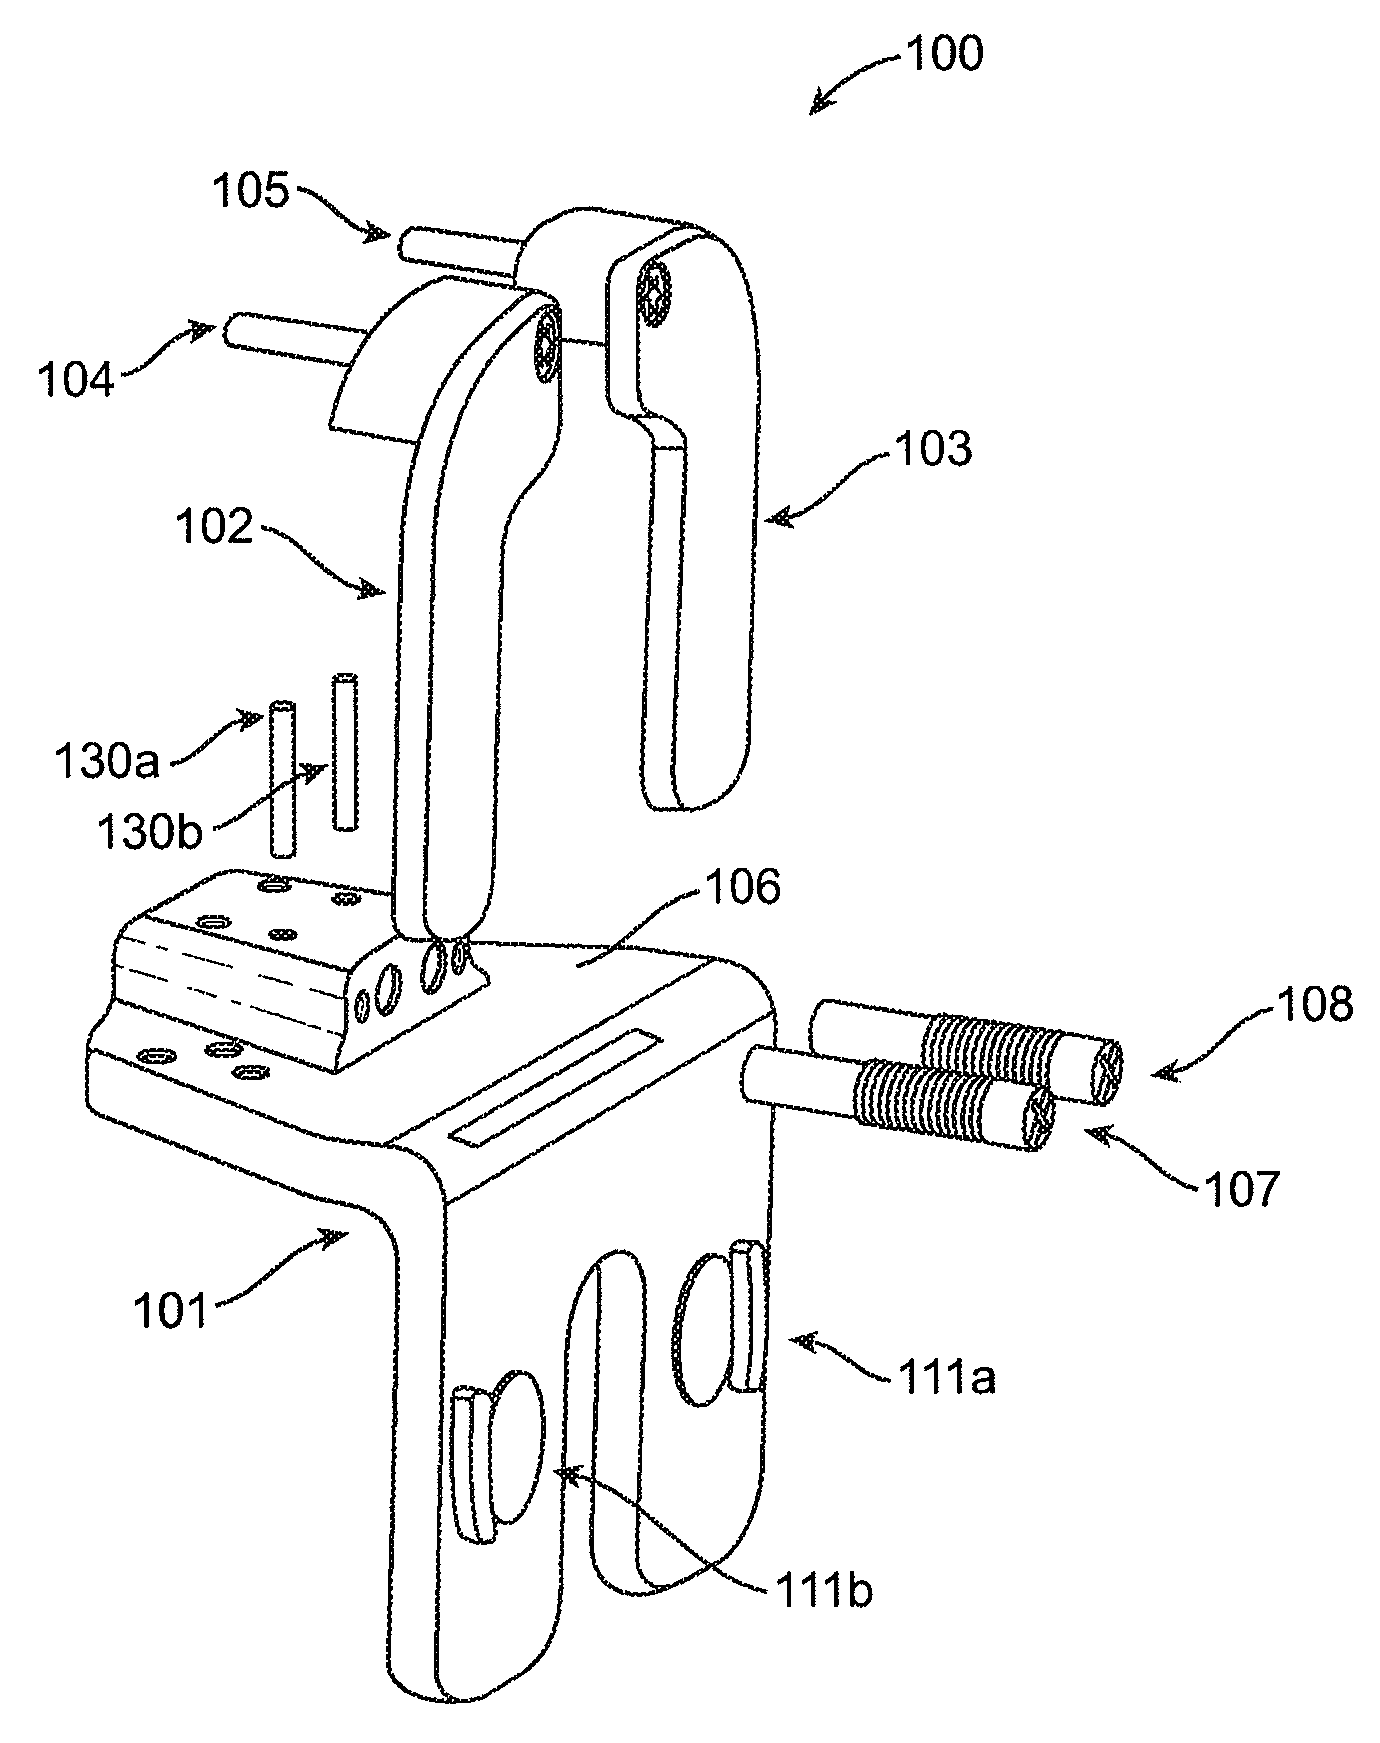 System for positioning a cutting guide in knee surgery